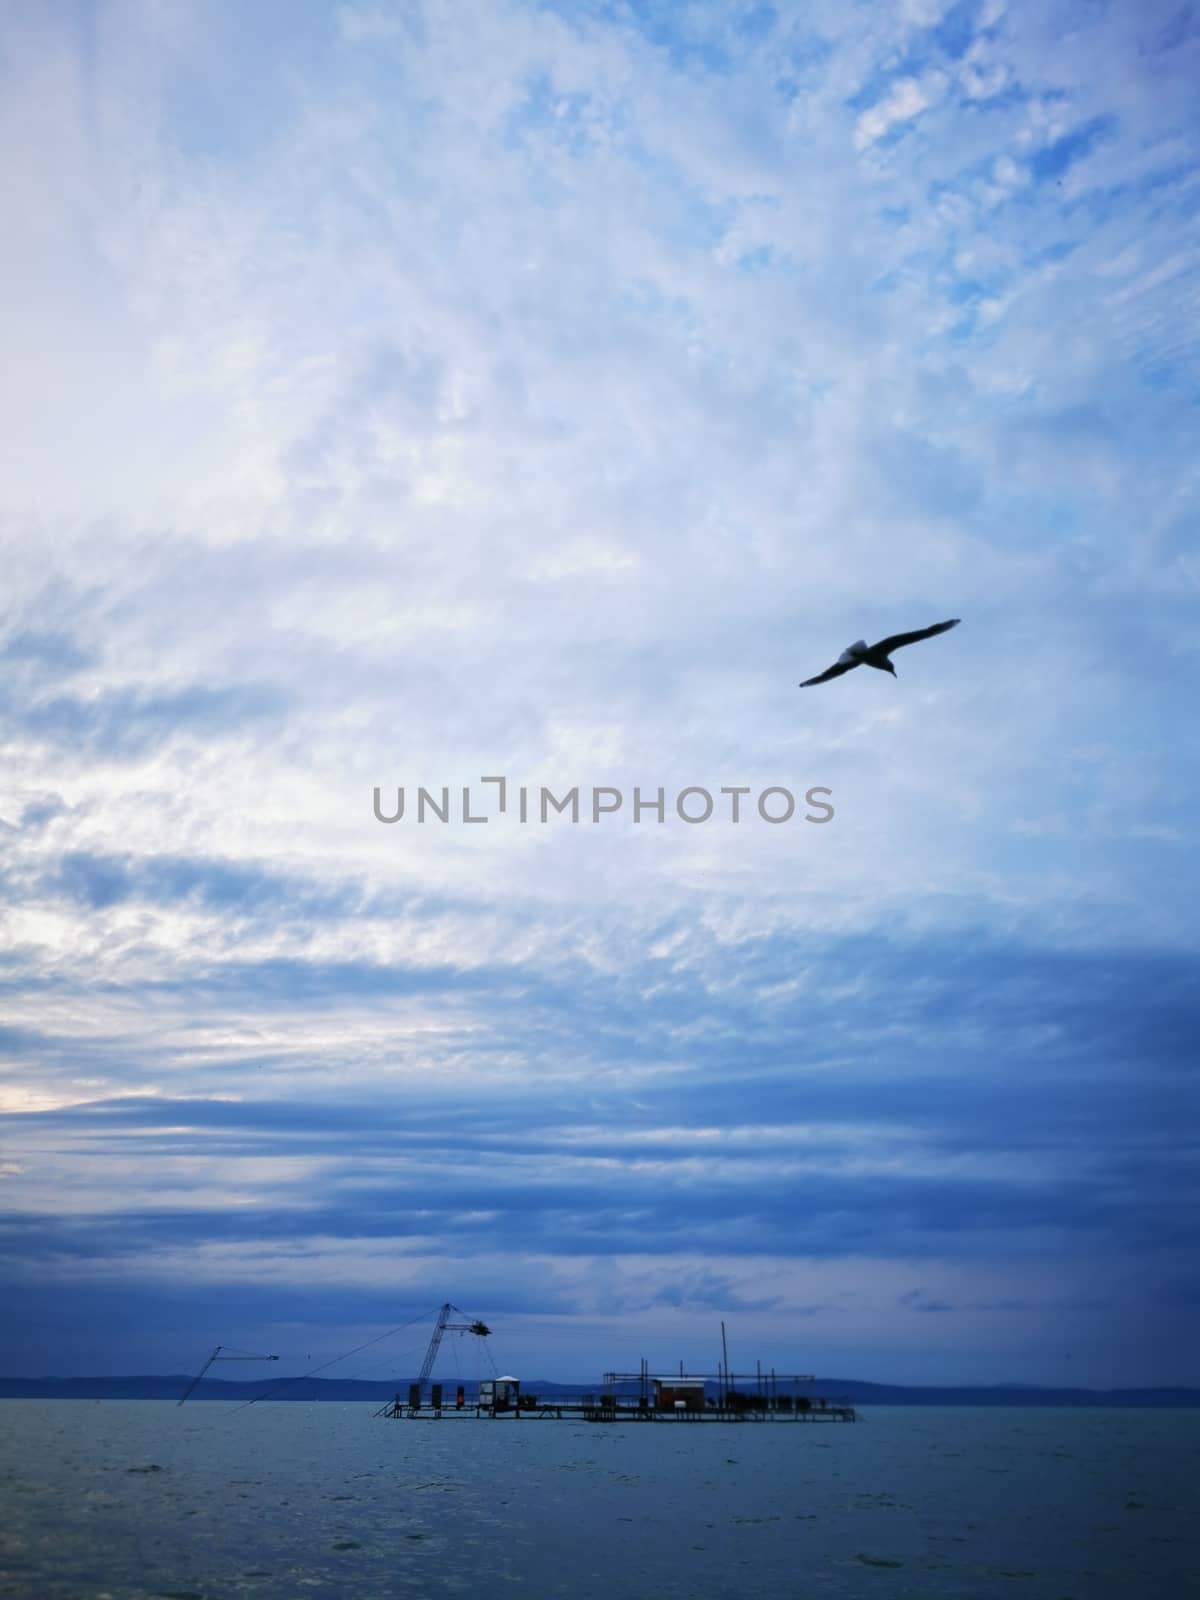 A large seagull flying through a cloudy blue sky. High quality photo